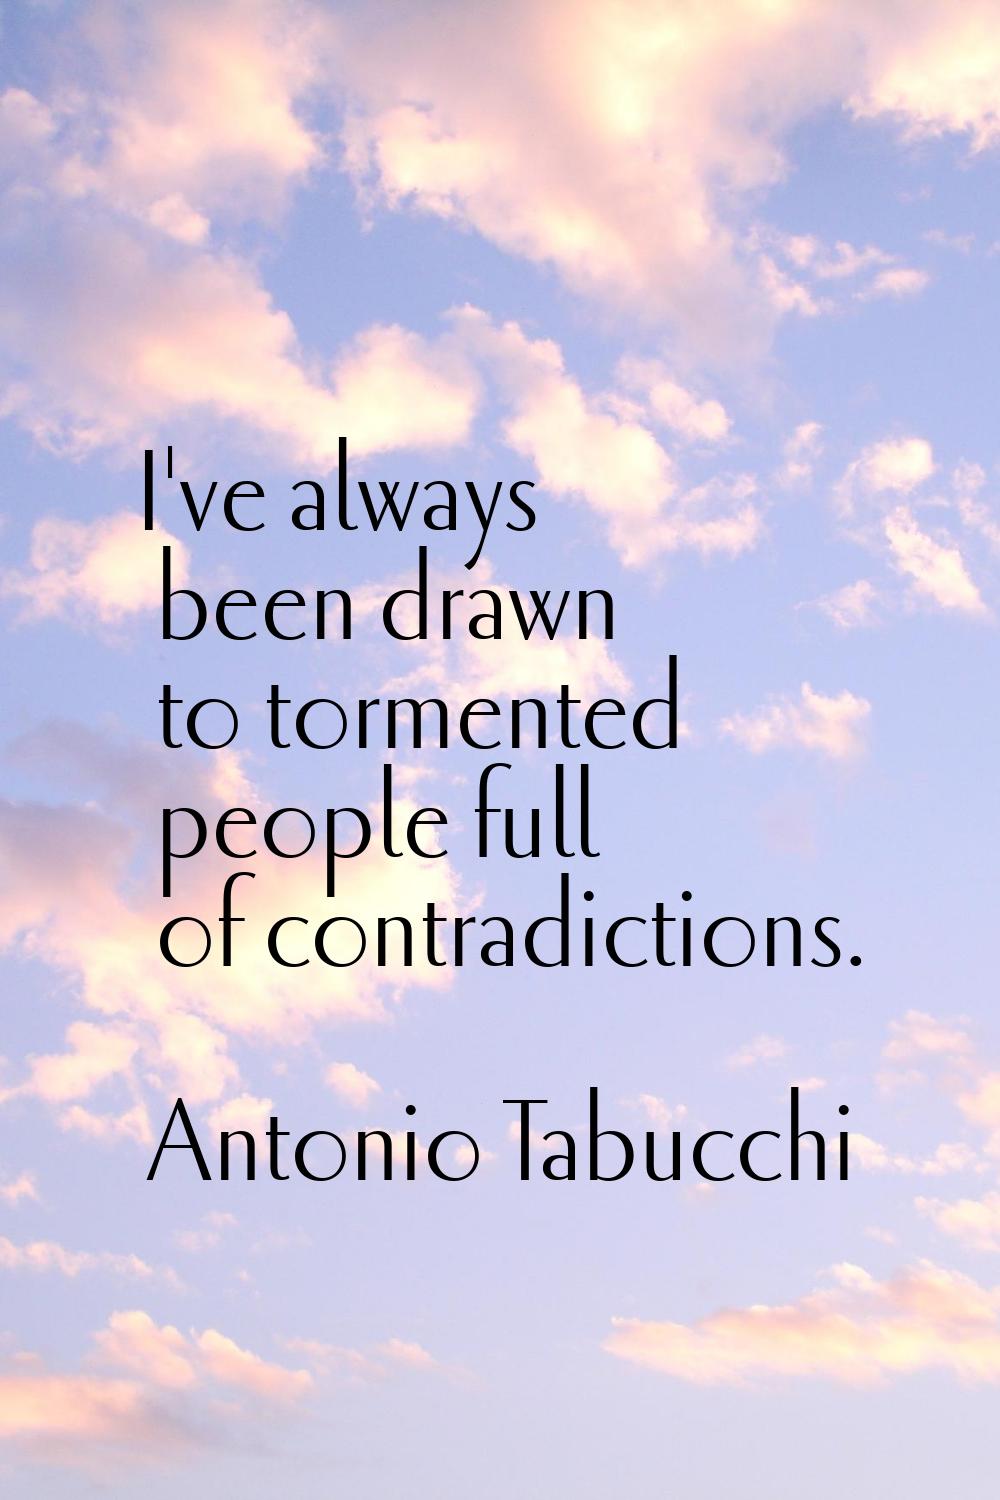 I've always been drawn to tormented people full of contradictions.